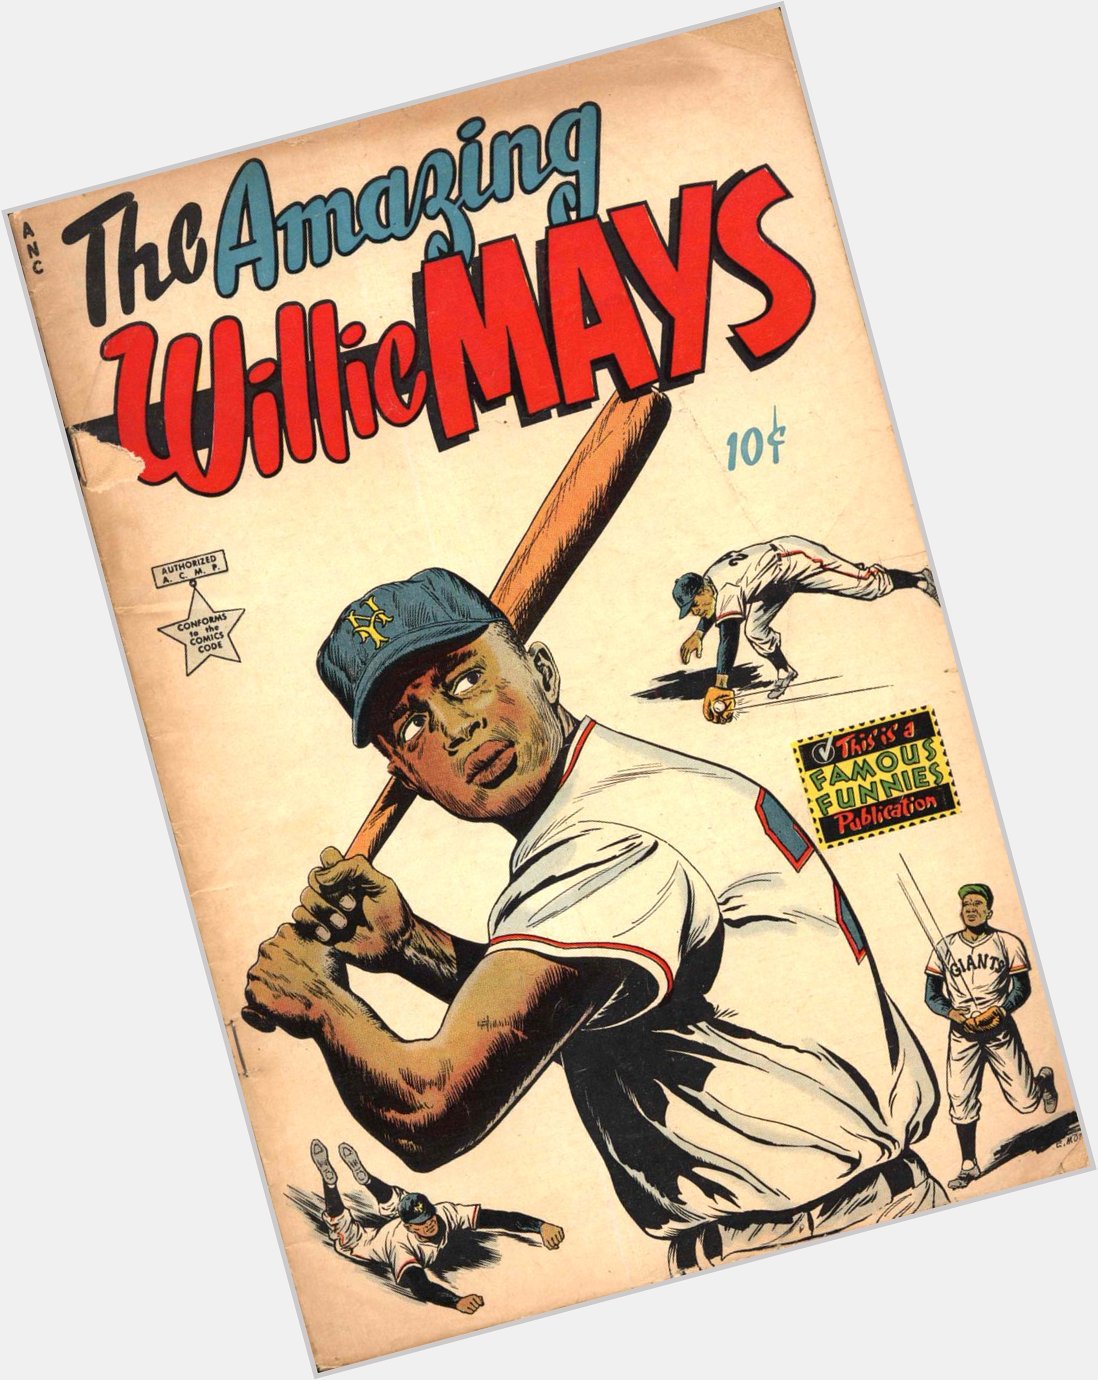 Say Hey!  Happy 88th Birthday Willie Mays!  and spread the LOVE!  